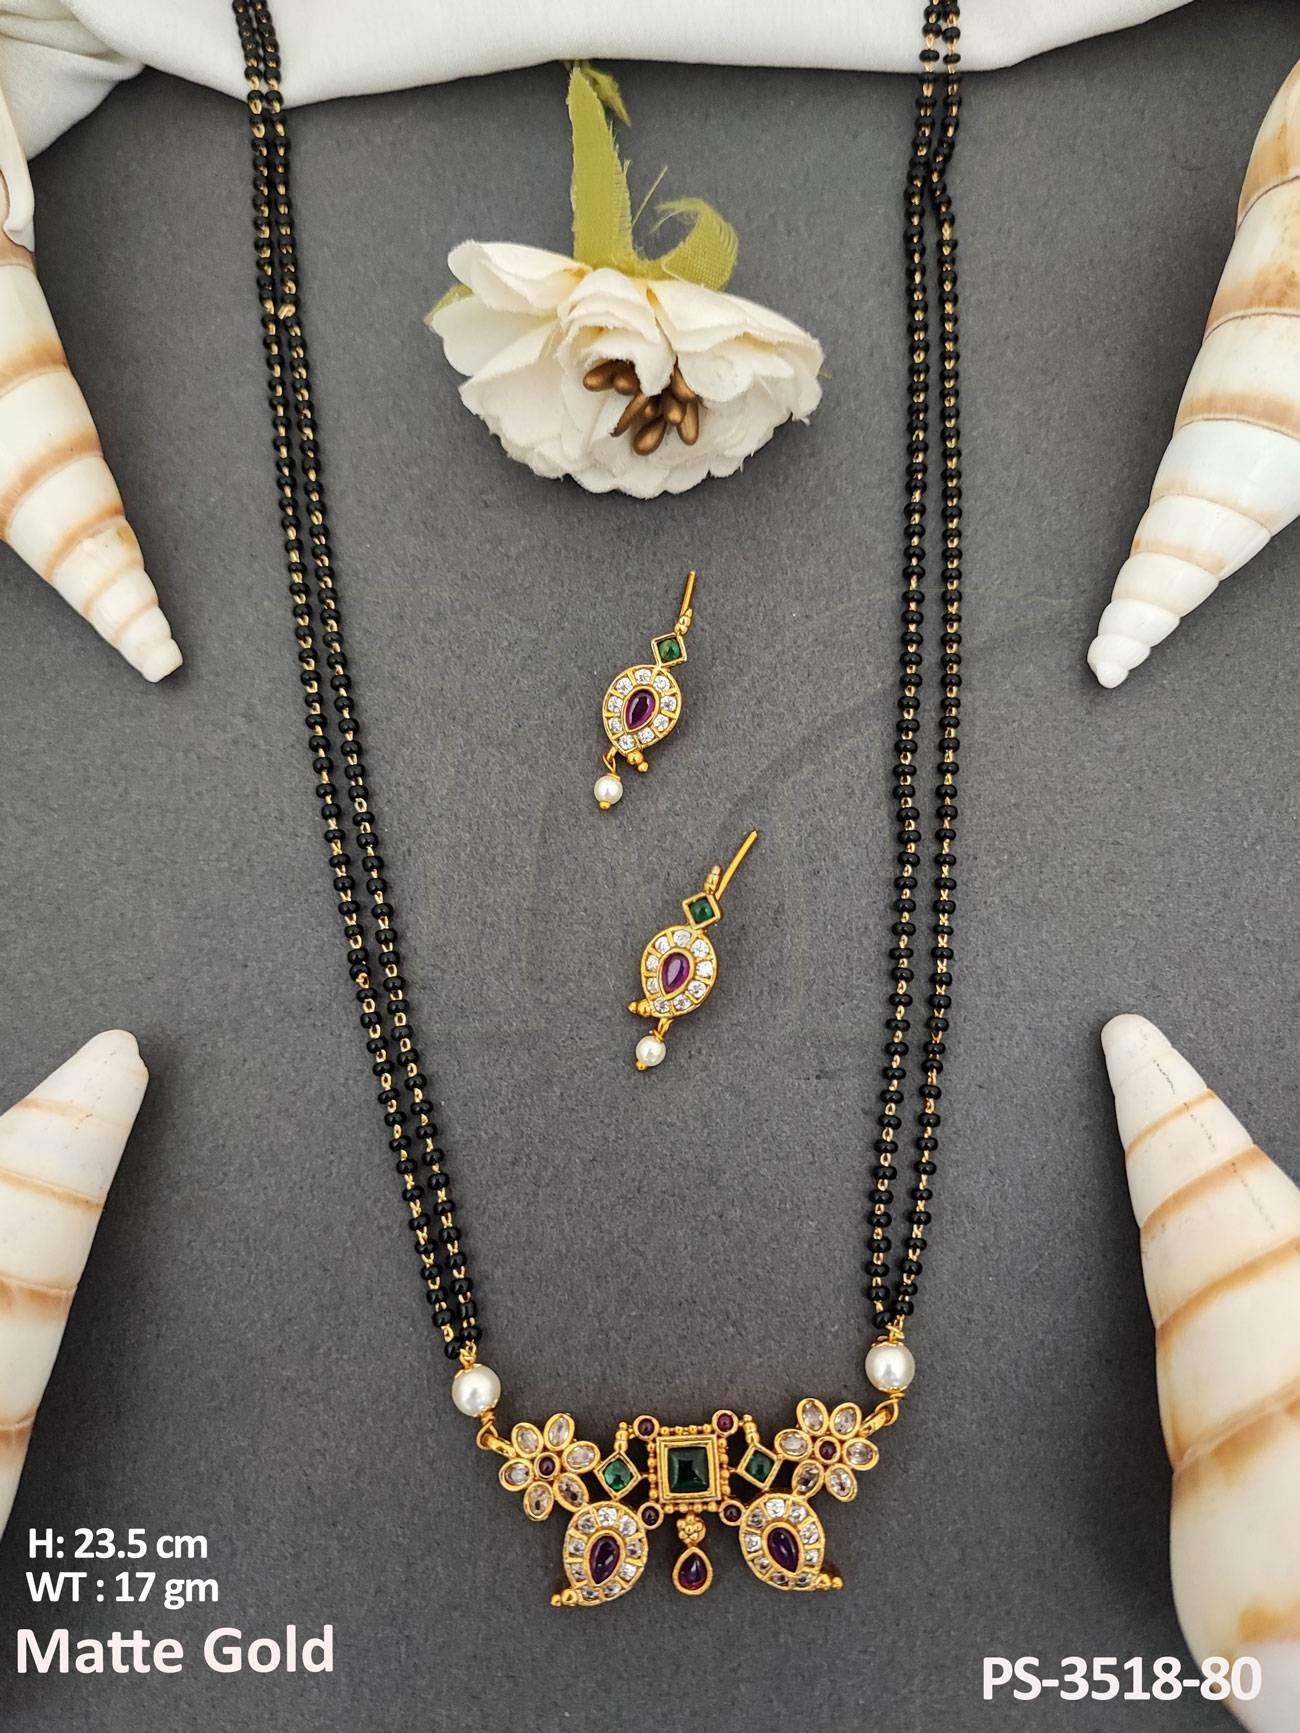 Exclusive Pendant Set features a designer design with elegant gold matte polish and intricate kemp jewellery detailing.